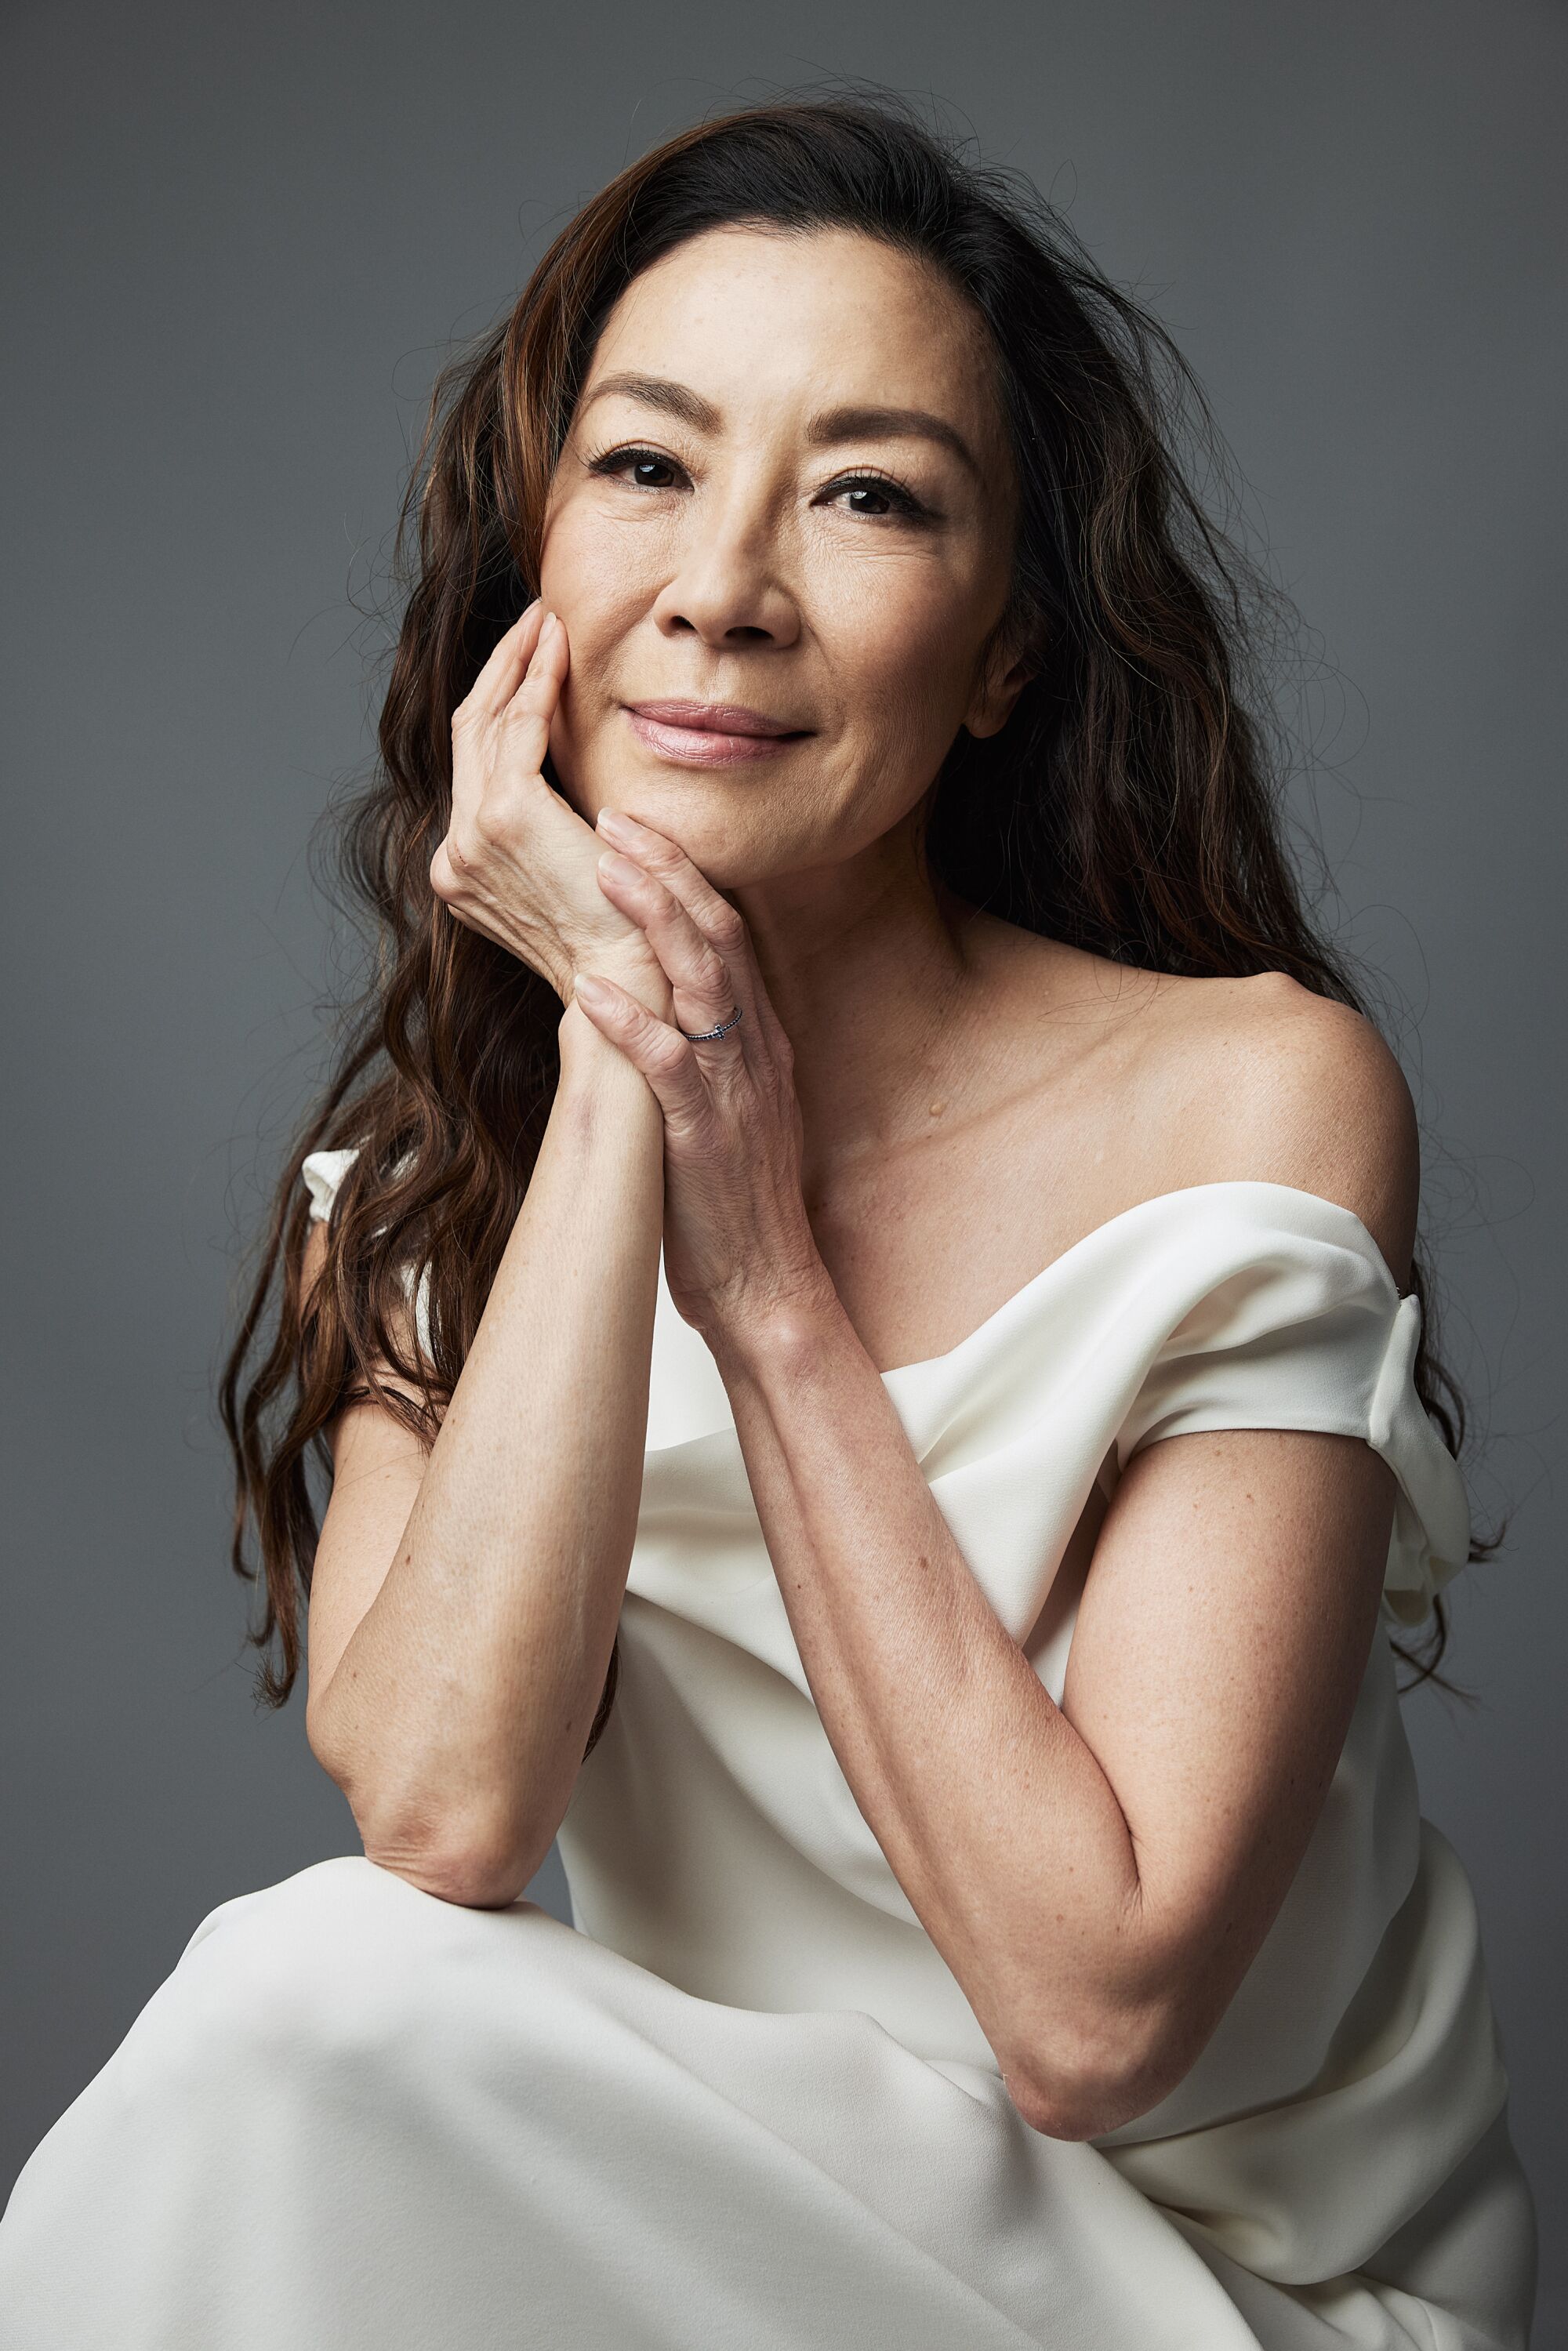 Michelle Yeoh laughs at 60: 'Yes! Finally! I'm cool!' - Los Angeles Times